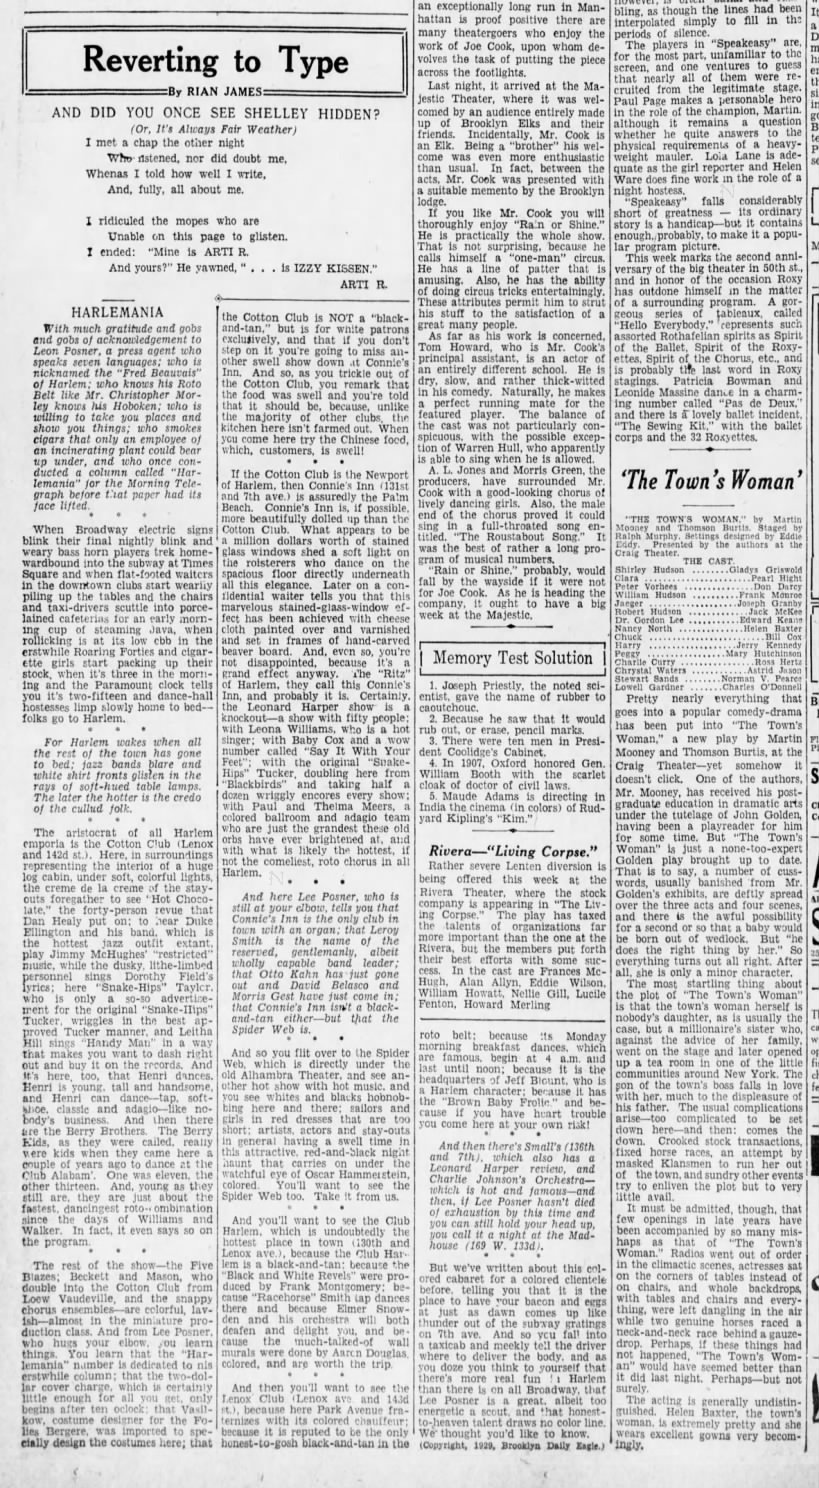 Descriptions of various Harlem nightclubs in 1929, including the Cotton Club and Connie's Inn